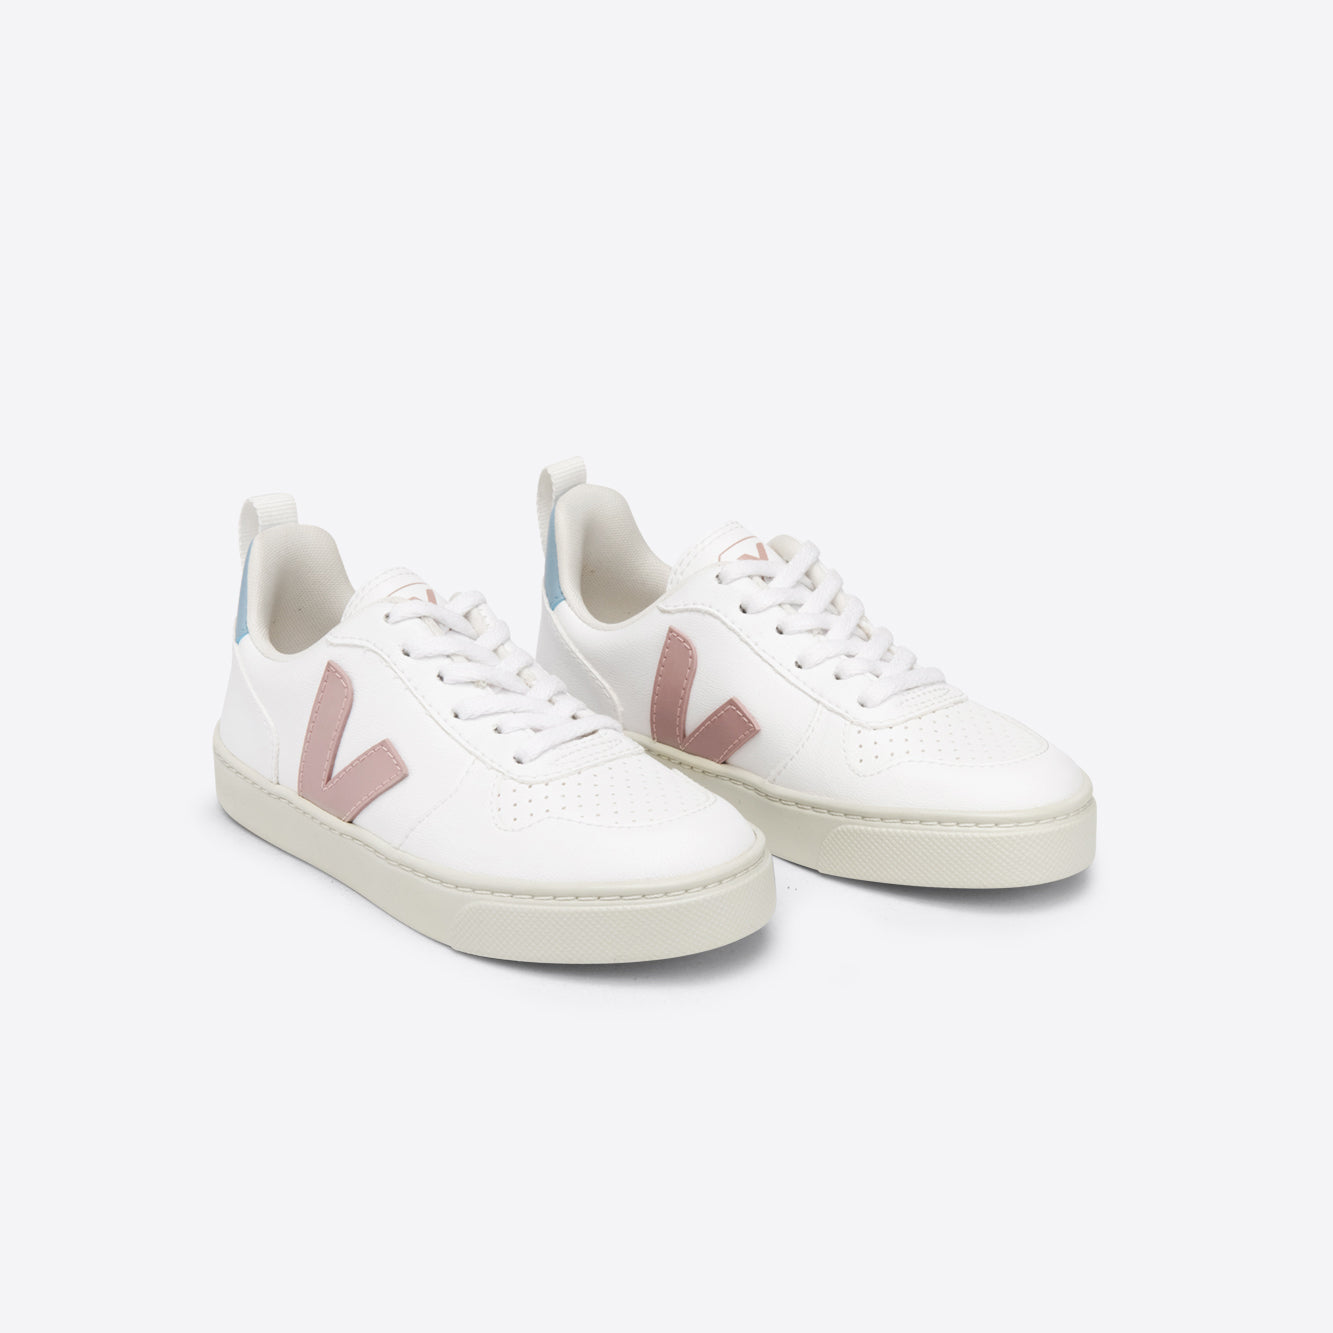 Boys & Girls White "SMALL V-10 LACES" Shoes